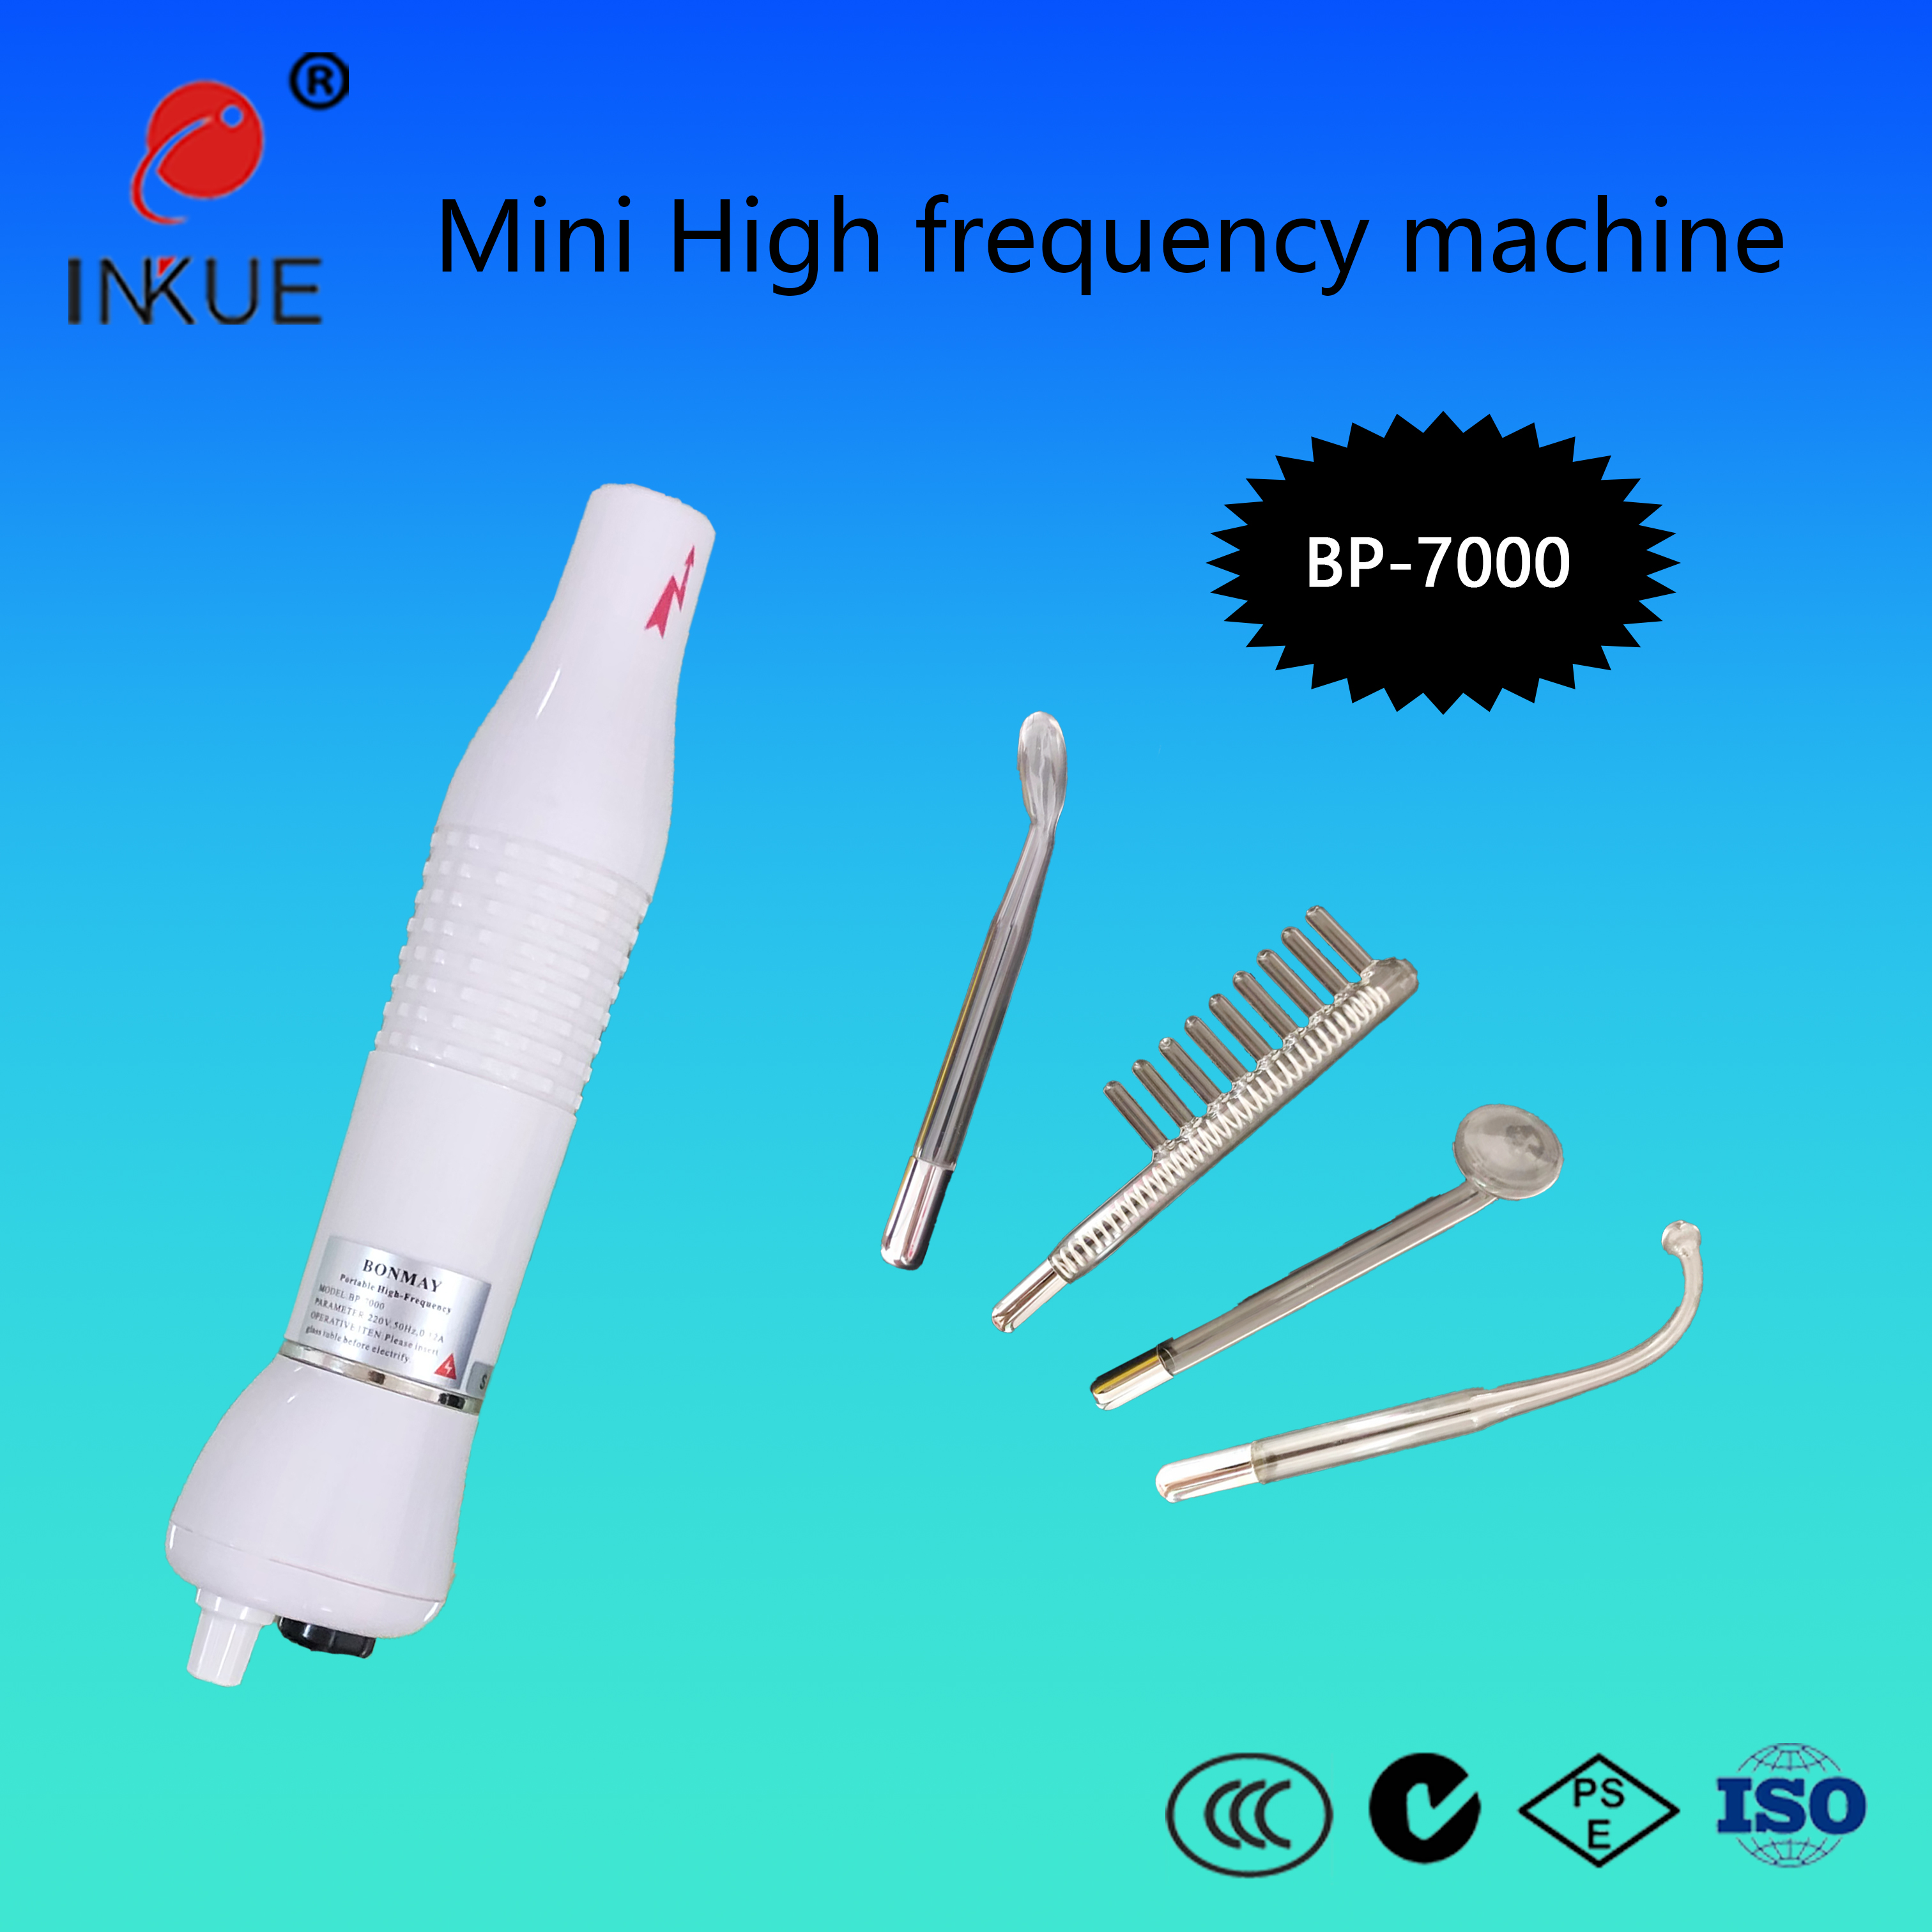 Professional skin therapy stick, portable, high frequency, skin therapy machine, 6 neon and argon, acne treatment, skin recovery, wrinkles reduction, facial skin lifting device